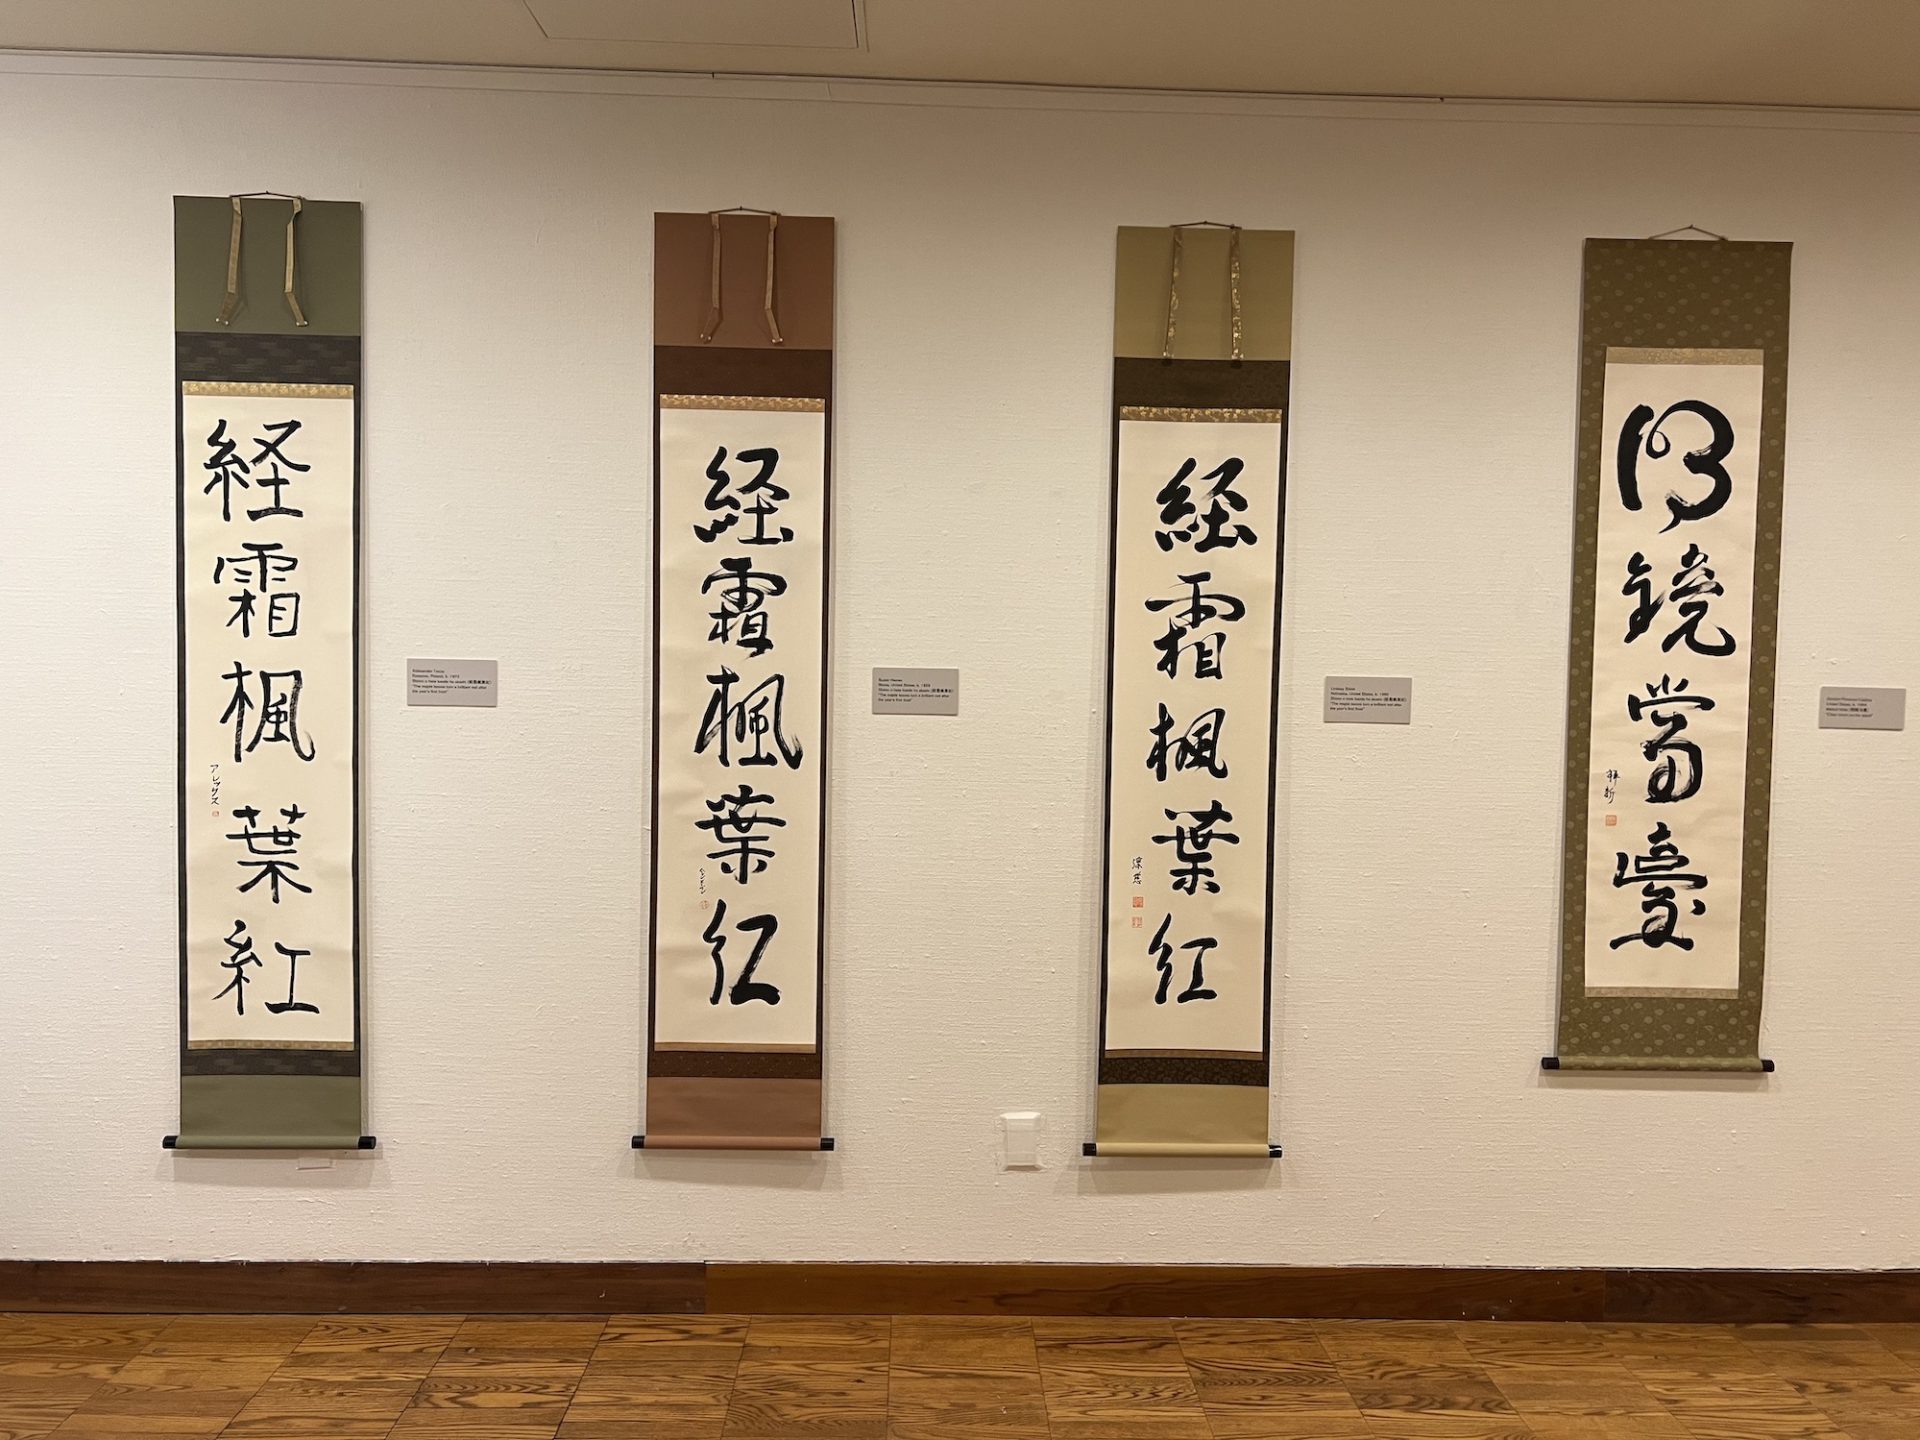 Four scrolls of Kanji calligraphy hang vertically, reaching almost floor to ceiling